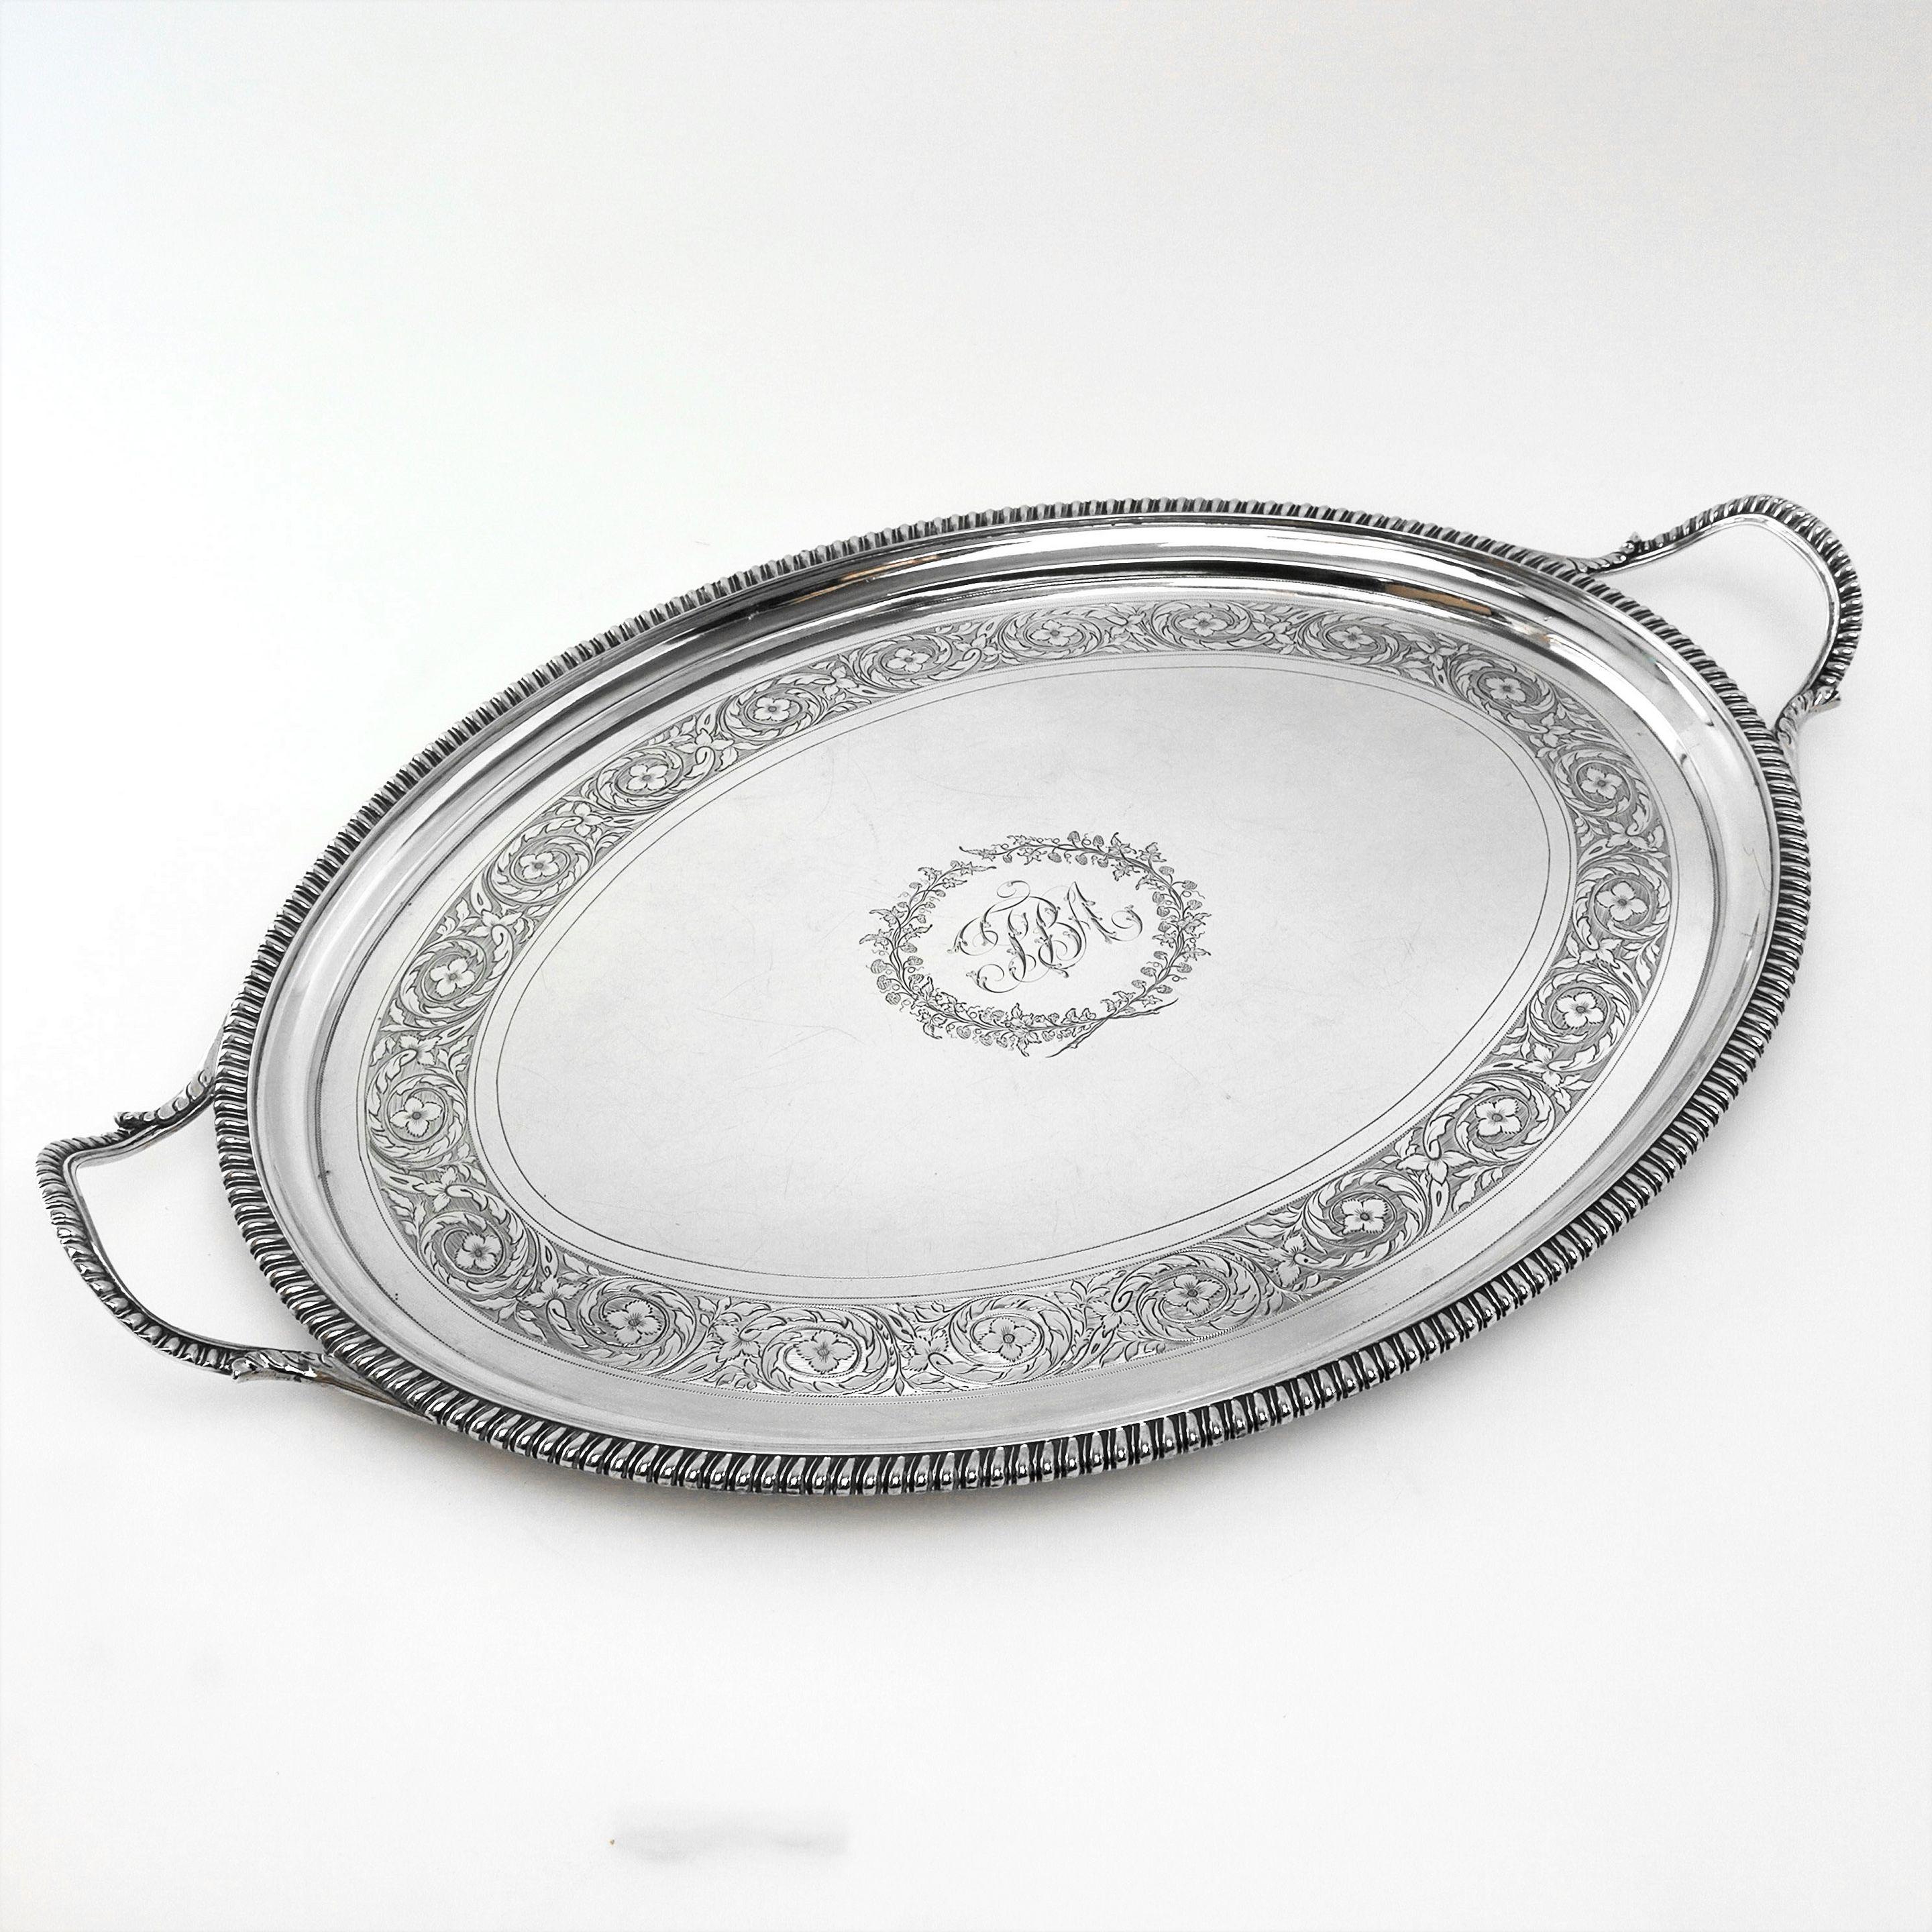 A classic antique Georgian solid Silver Tea Tray with an oval shape and decorated with a gadroon border on the rim and on the handles. The interior of the Tray has an engraved floral and scroll band around a central cartouche with initials in the